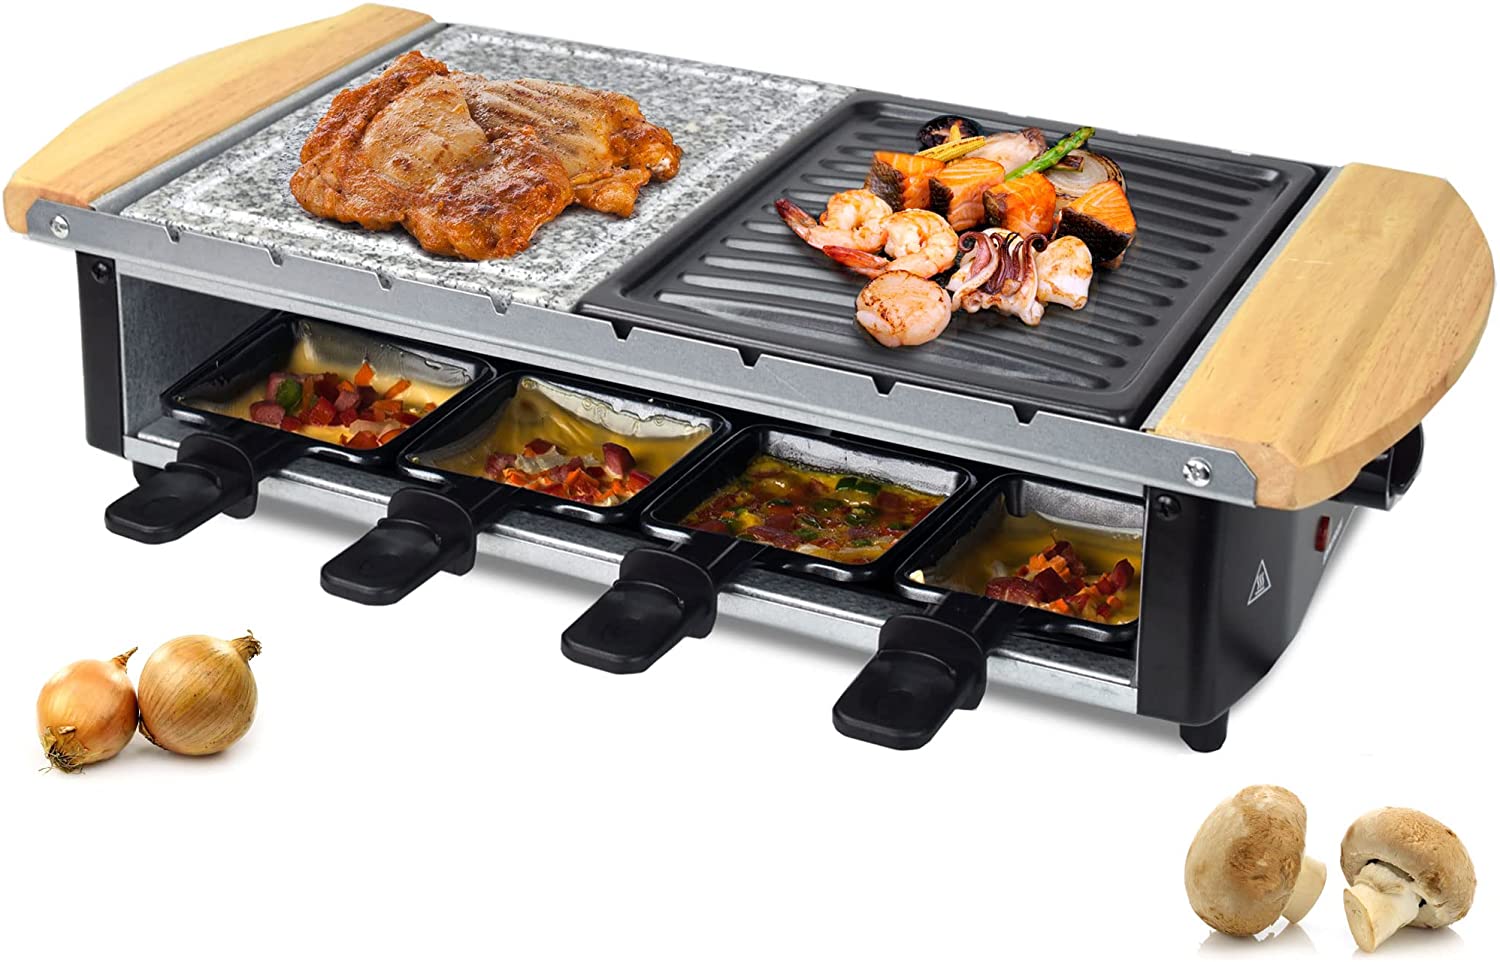 Syntrox Germany RAC-1200W-Uri Raclette with Grill and Hot Stone in Stainless Steel Design for 8 People